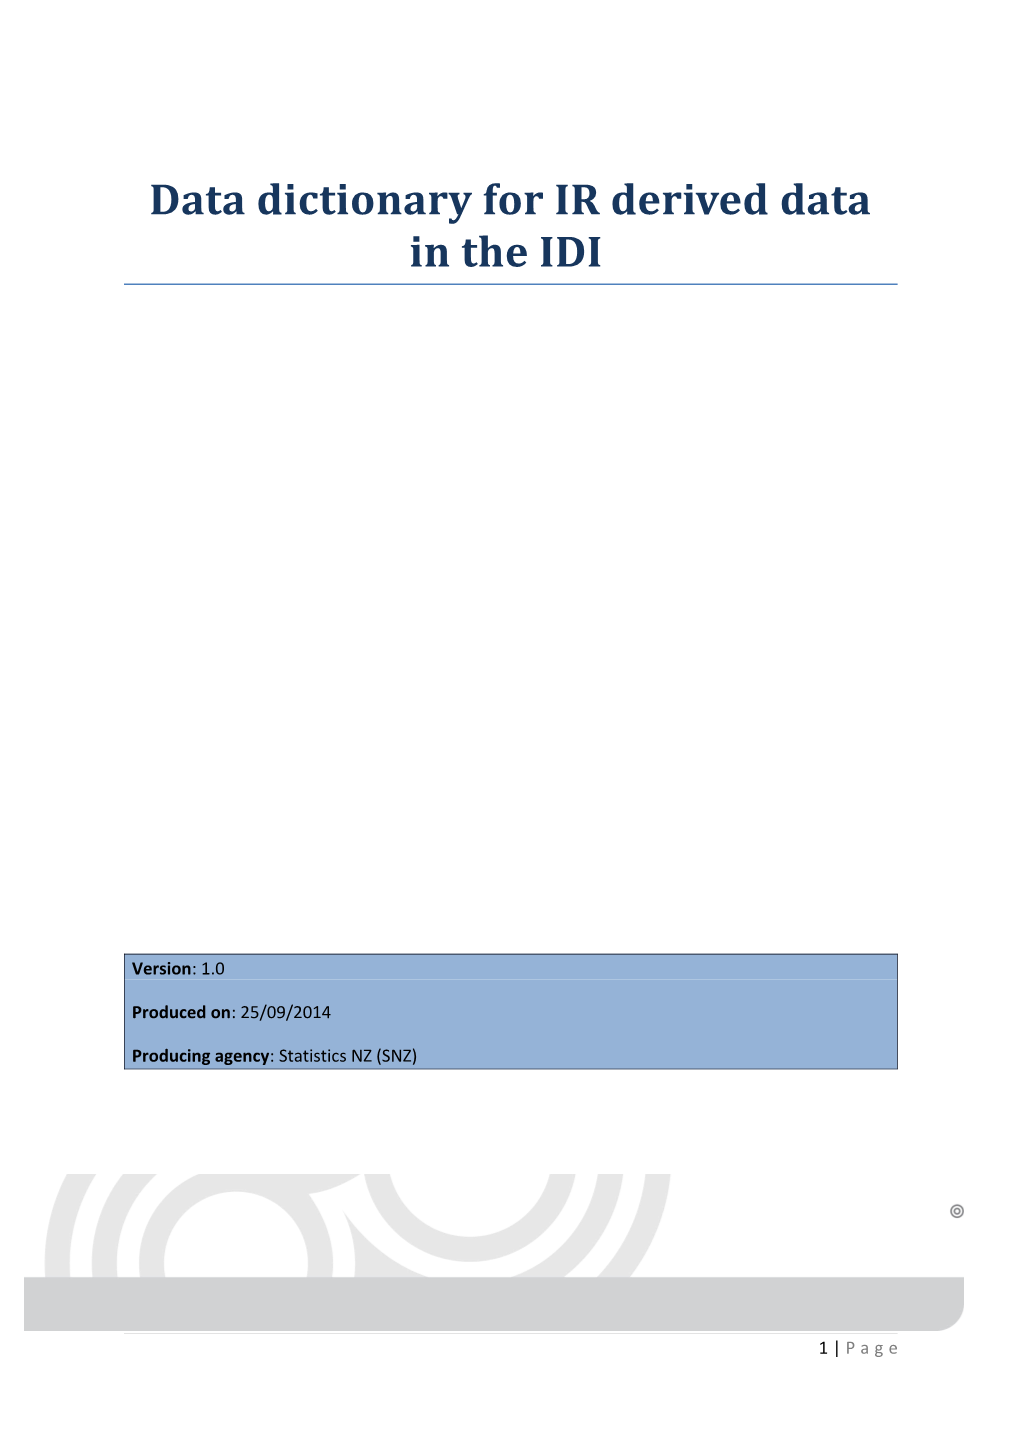 Data Dictionary for IR Derived Data in the IDI